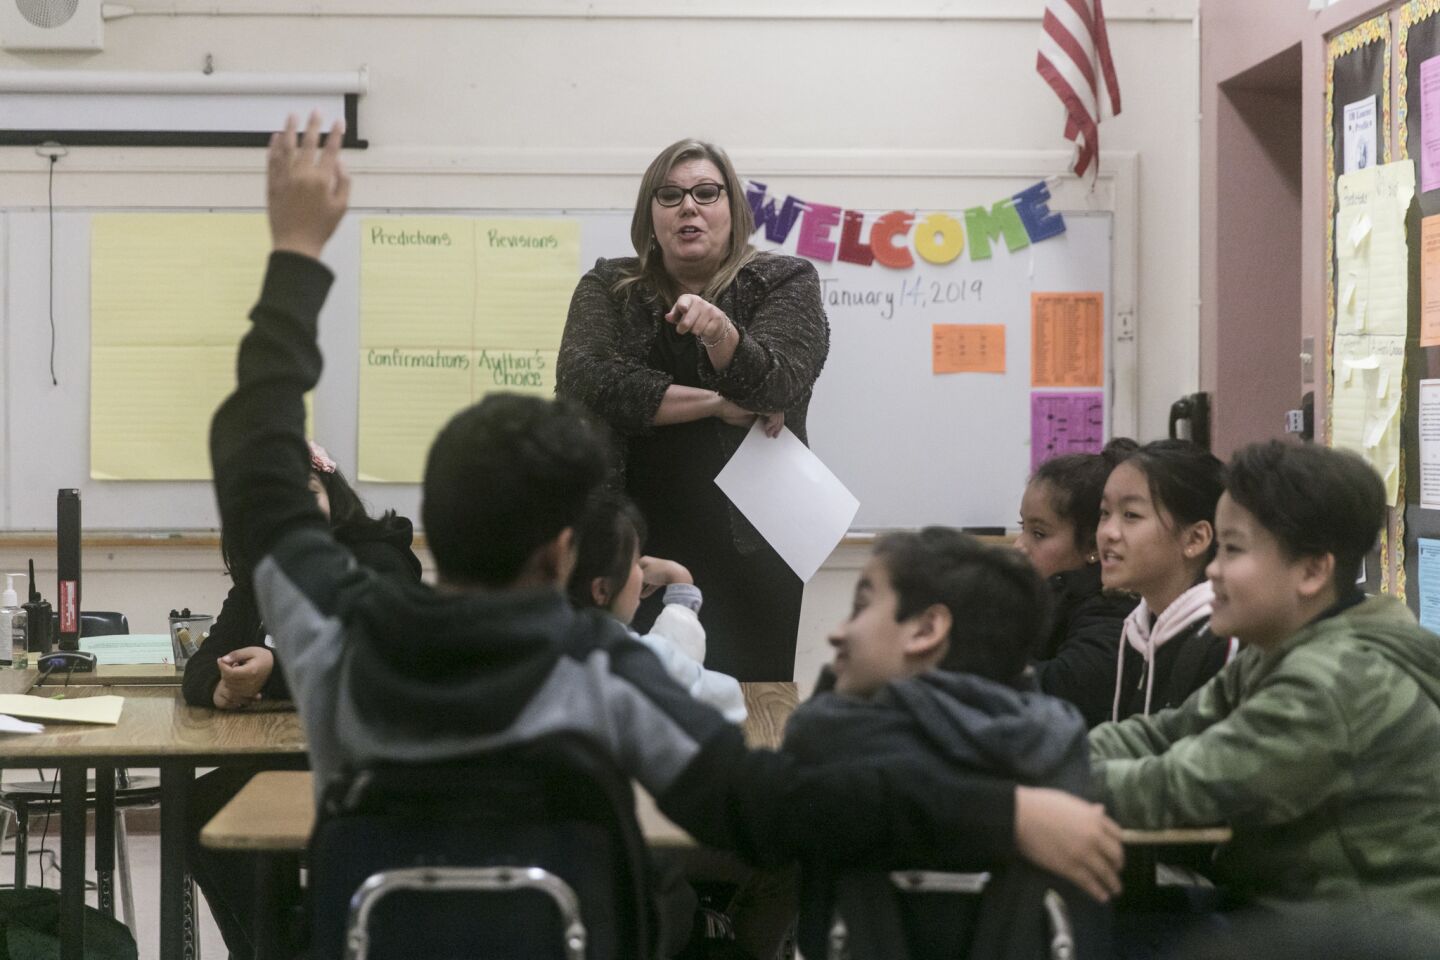 Dr. Frances Gibson, Chief Academic Officer at the L.A. Unified School District, serves as a substitute teacher leading a language arts class at El Sereno Middle School.